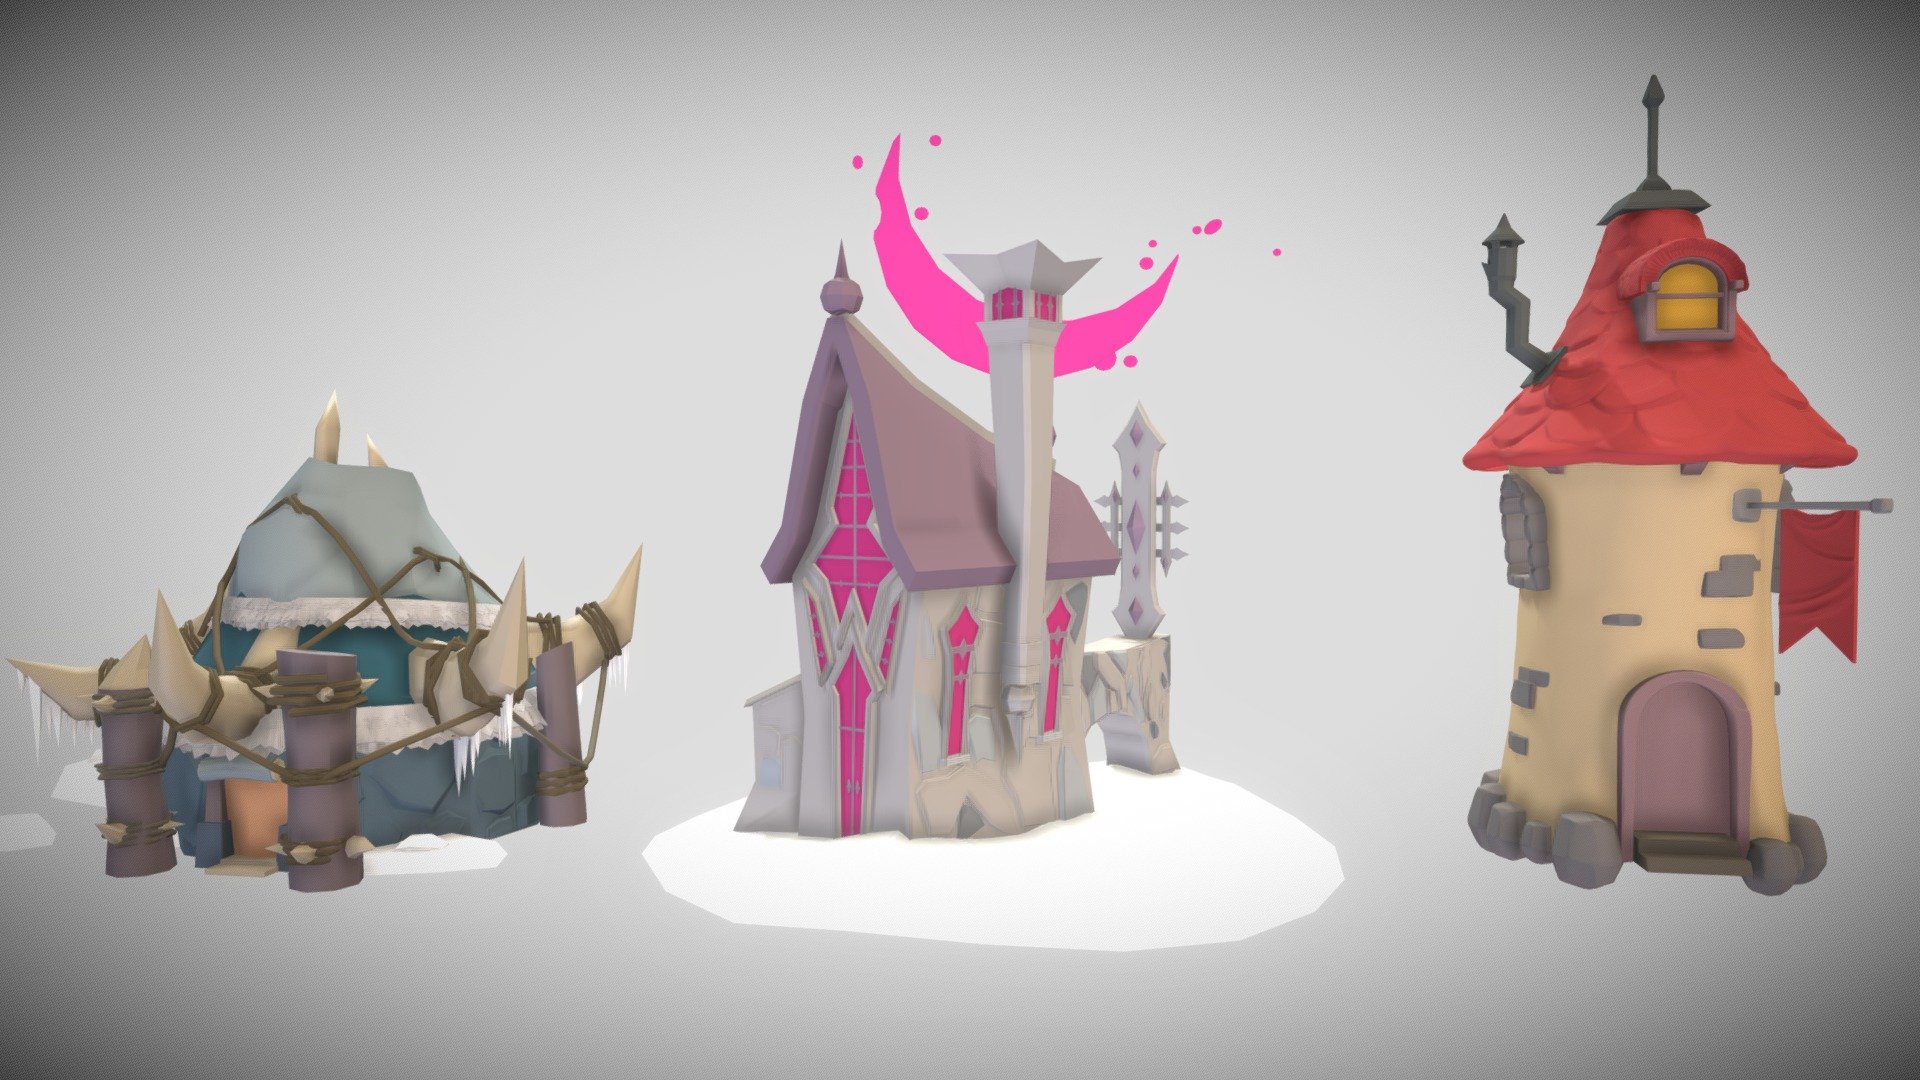 3 drafts for 40 mins

Third object -  Tower with red roof is a copy of 3d model this guy 3dEX - link on his channel down below
https://www.youtube.com/channel/UC0InhTEH5giQYPaTp69z-7g - Fourth HM XYZ - 3 detailed colored drafts - Download Free 3D model by Andrew (@nimzuk) 3d model